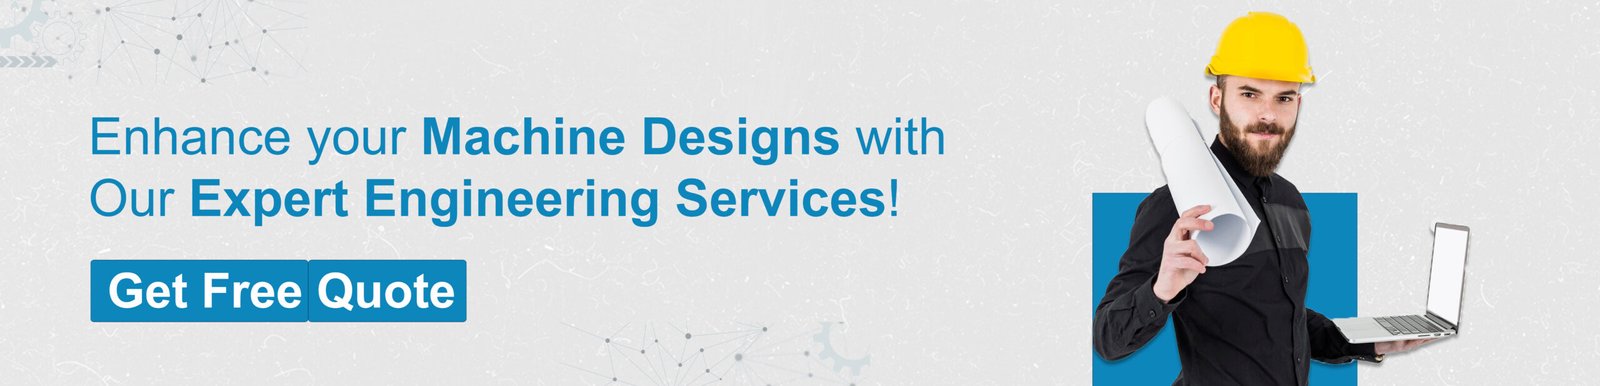 Enhance your Machine designs with our expert engineering services! 